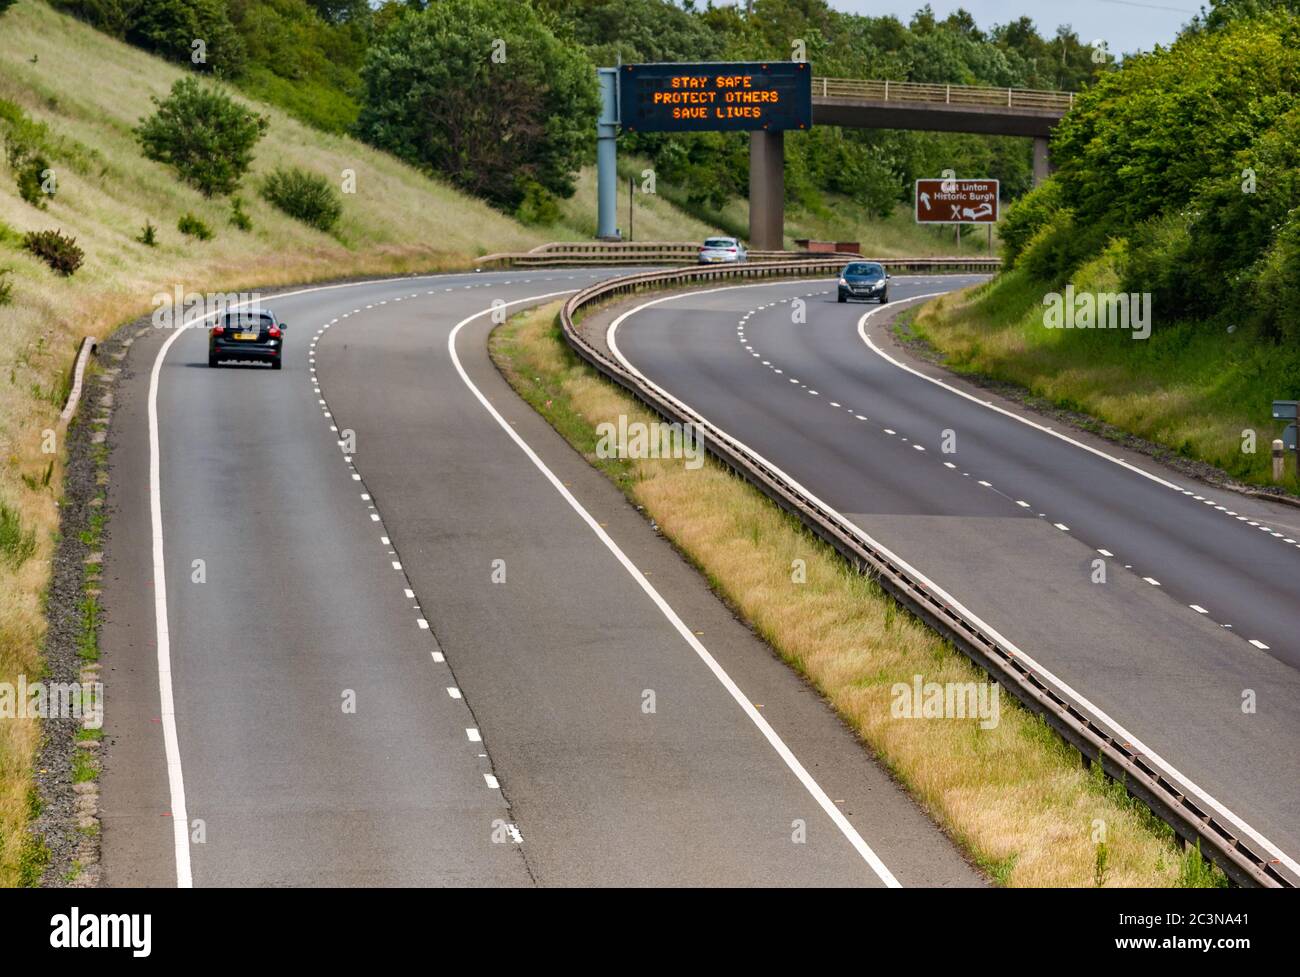 Traffic on A1 with new Covid-19 pandemic message on gantry 'Stay Safe Protect Others Save Lives', East Lothian, Scotland, UK Stock Photo